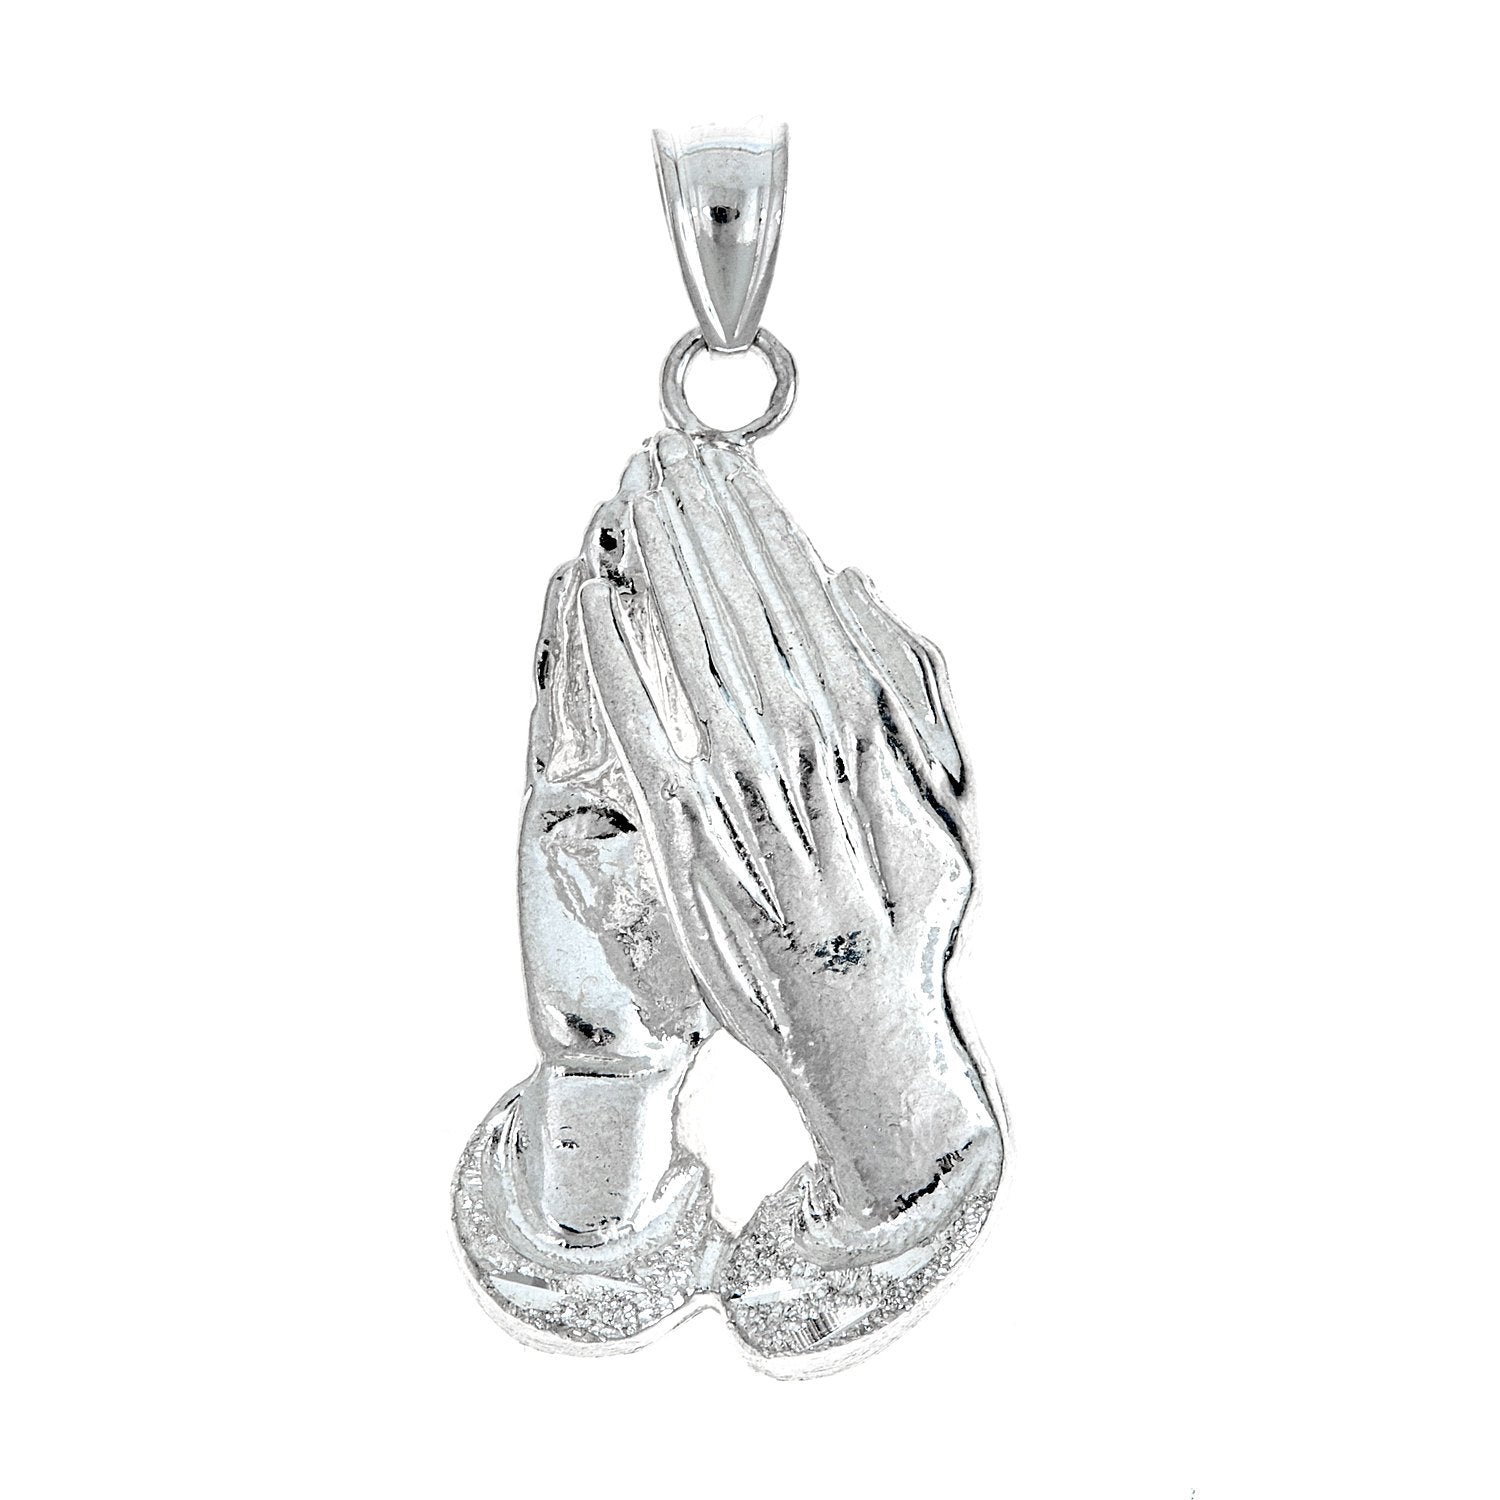 925 Sterling Silver Large Praying Hands Pendant - MADE IN USA (7 grams) - Betterjewelry